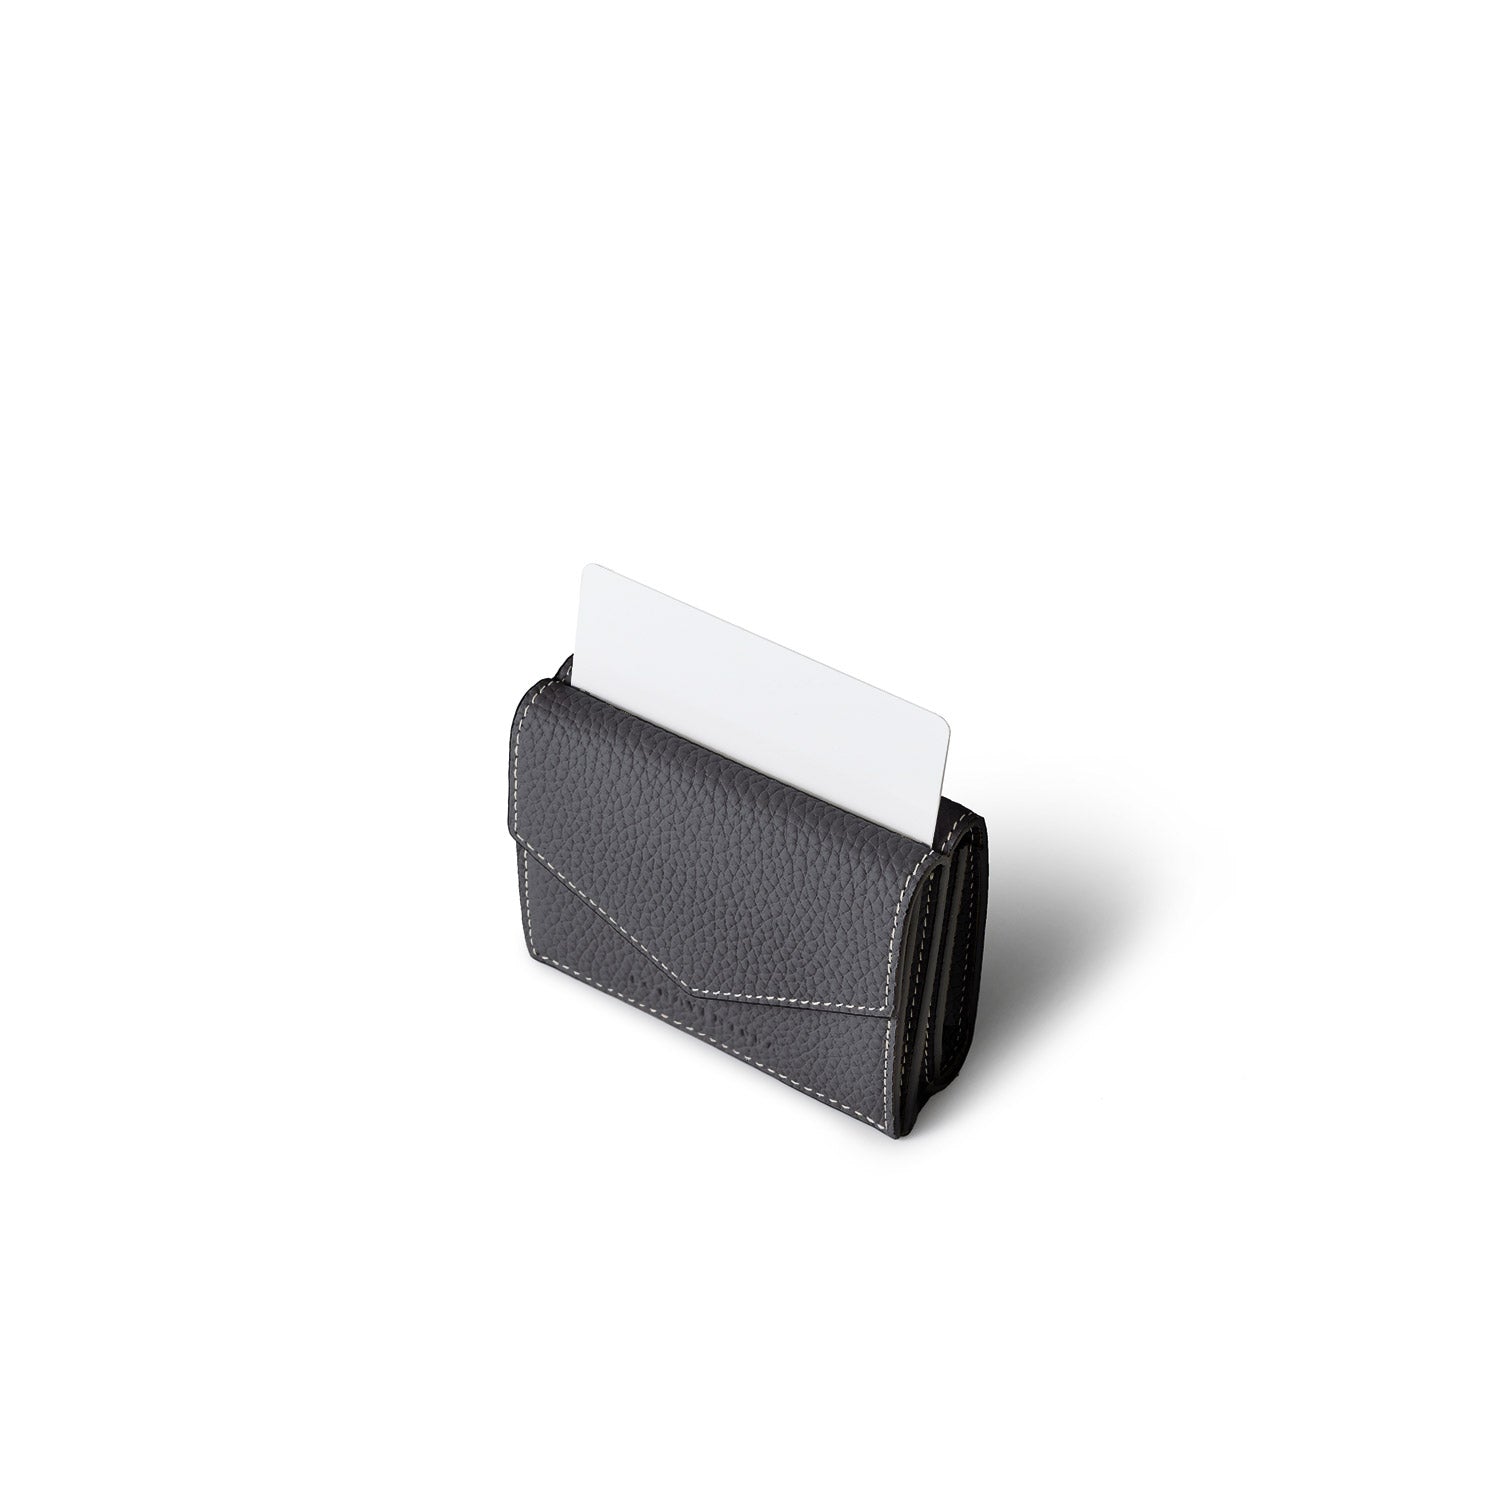 All-shrunk leather small wallet